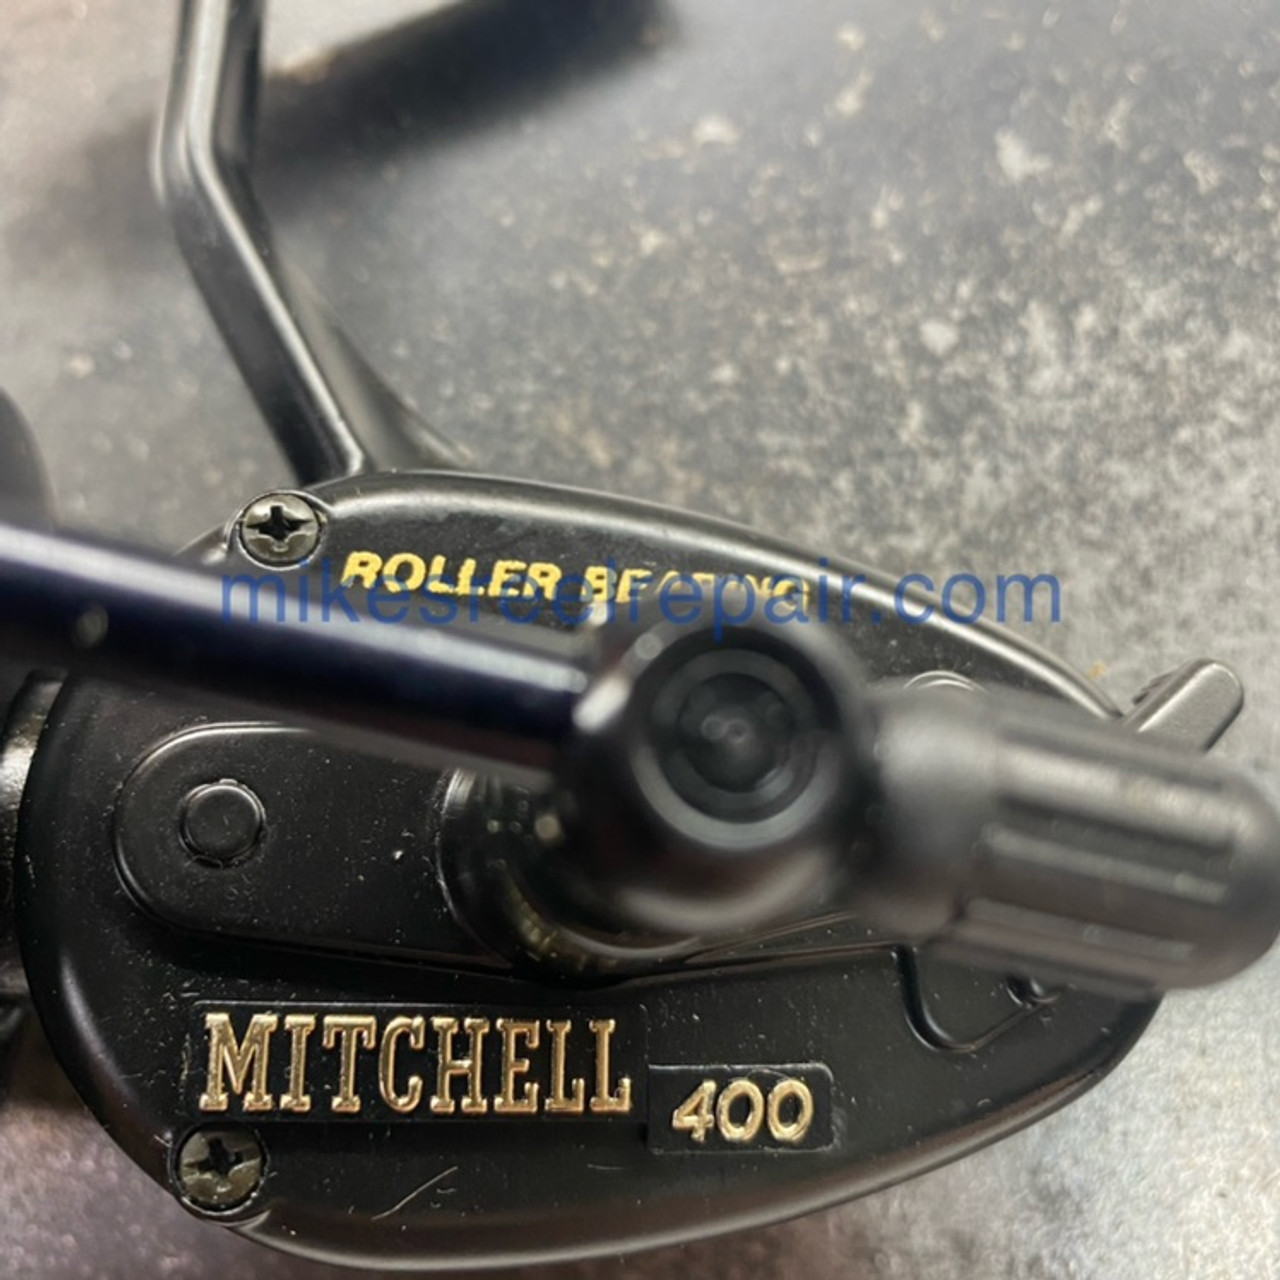 MITCHELL 400 - MADE IN FRANCE